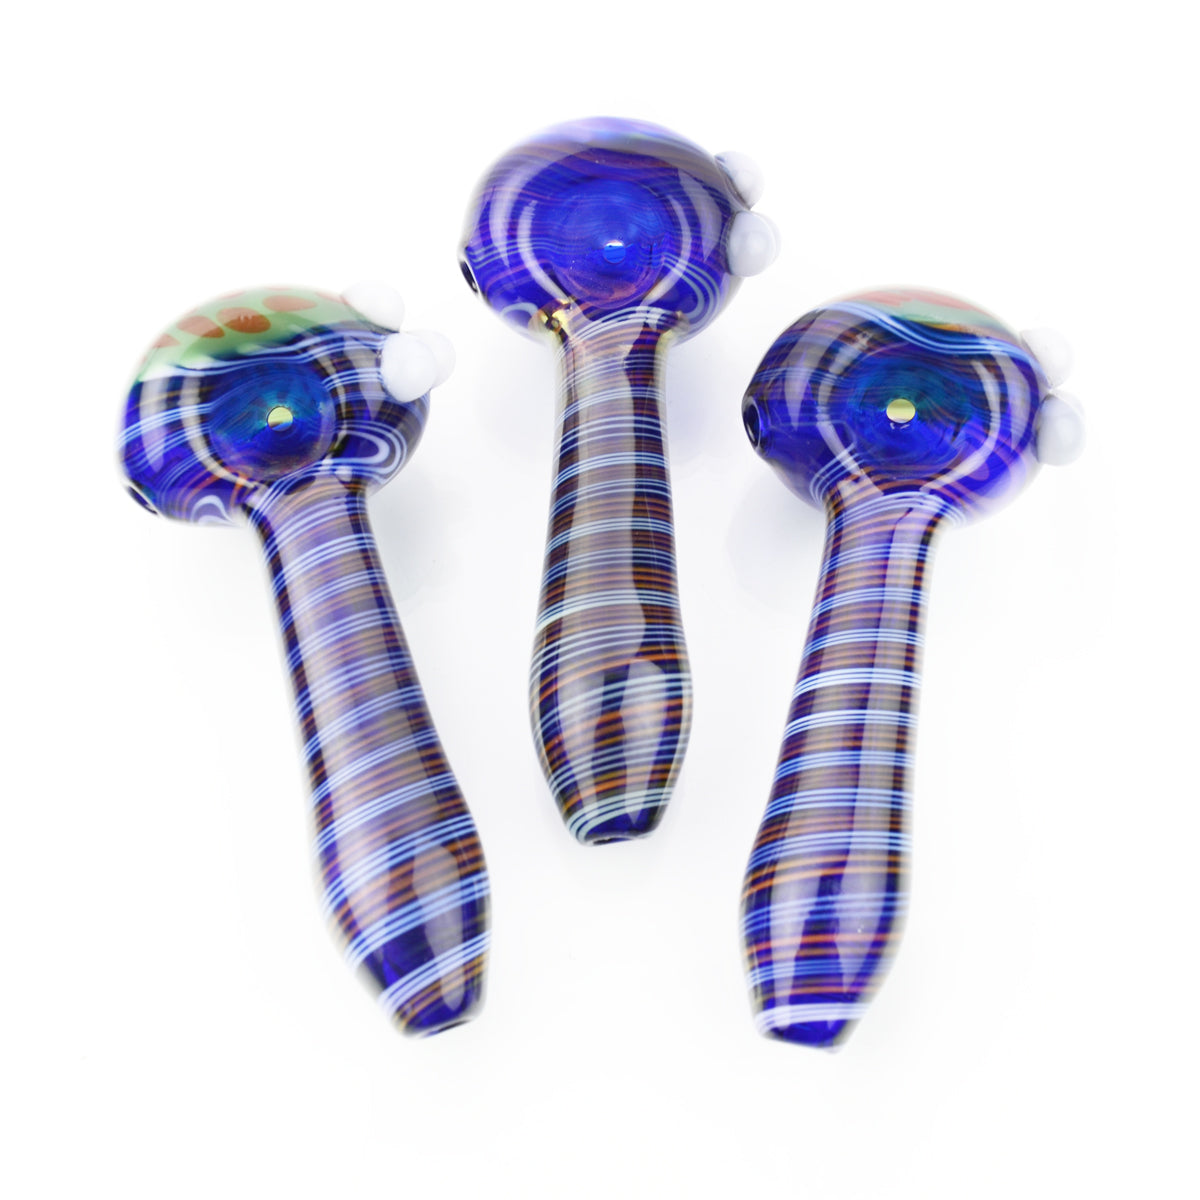 4.5'' American Hand PIPE Honeycomb Art Head with Spiral Design